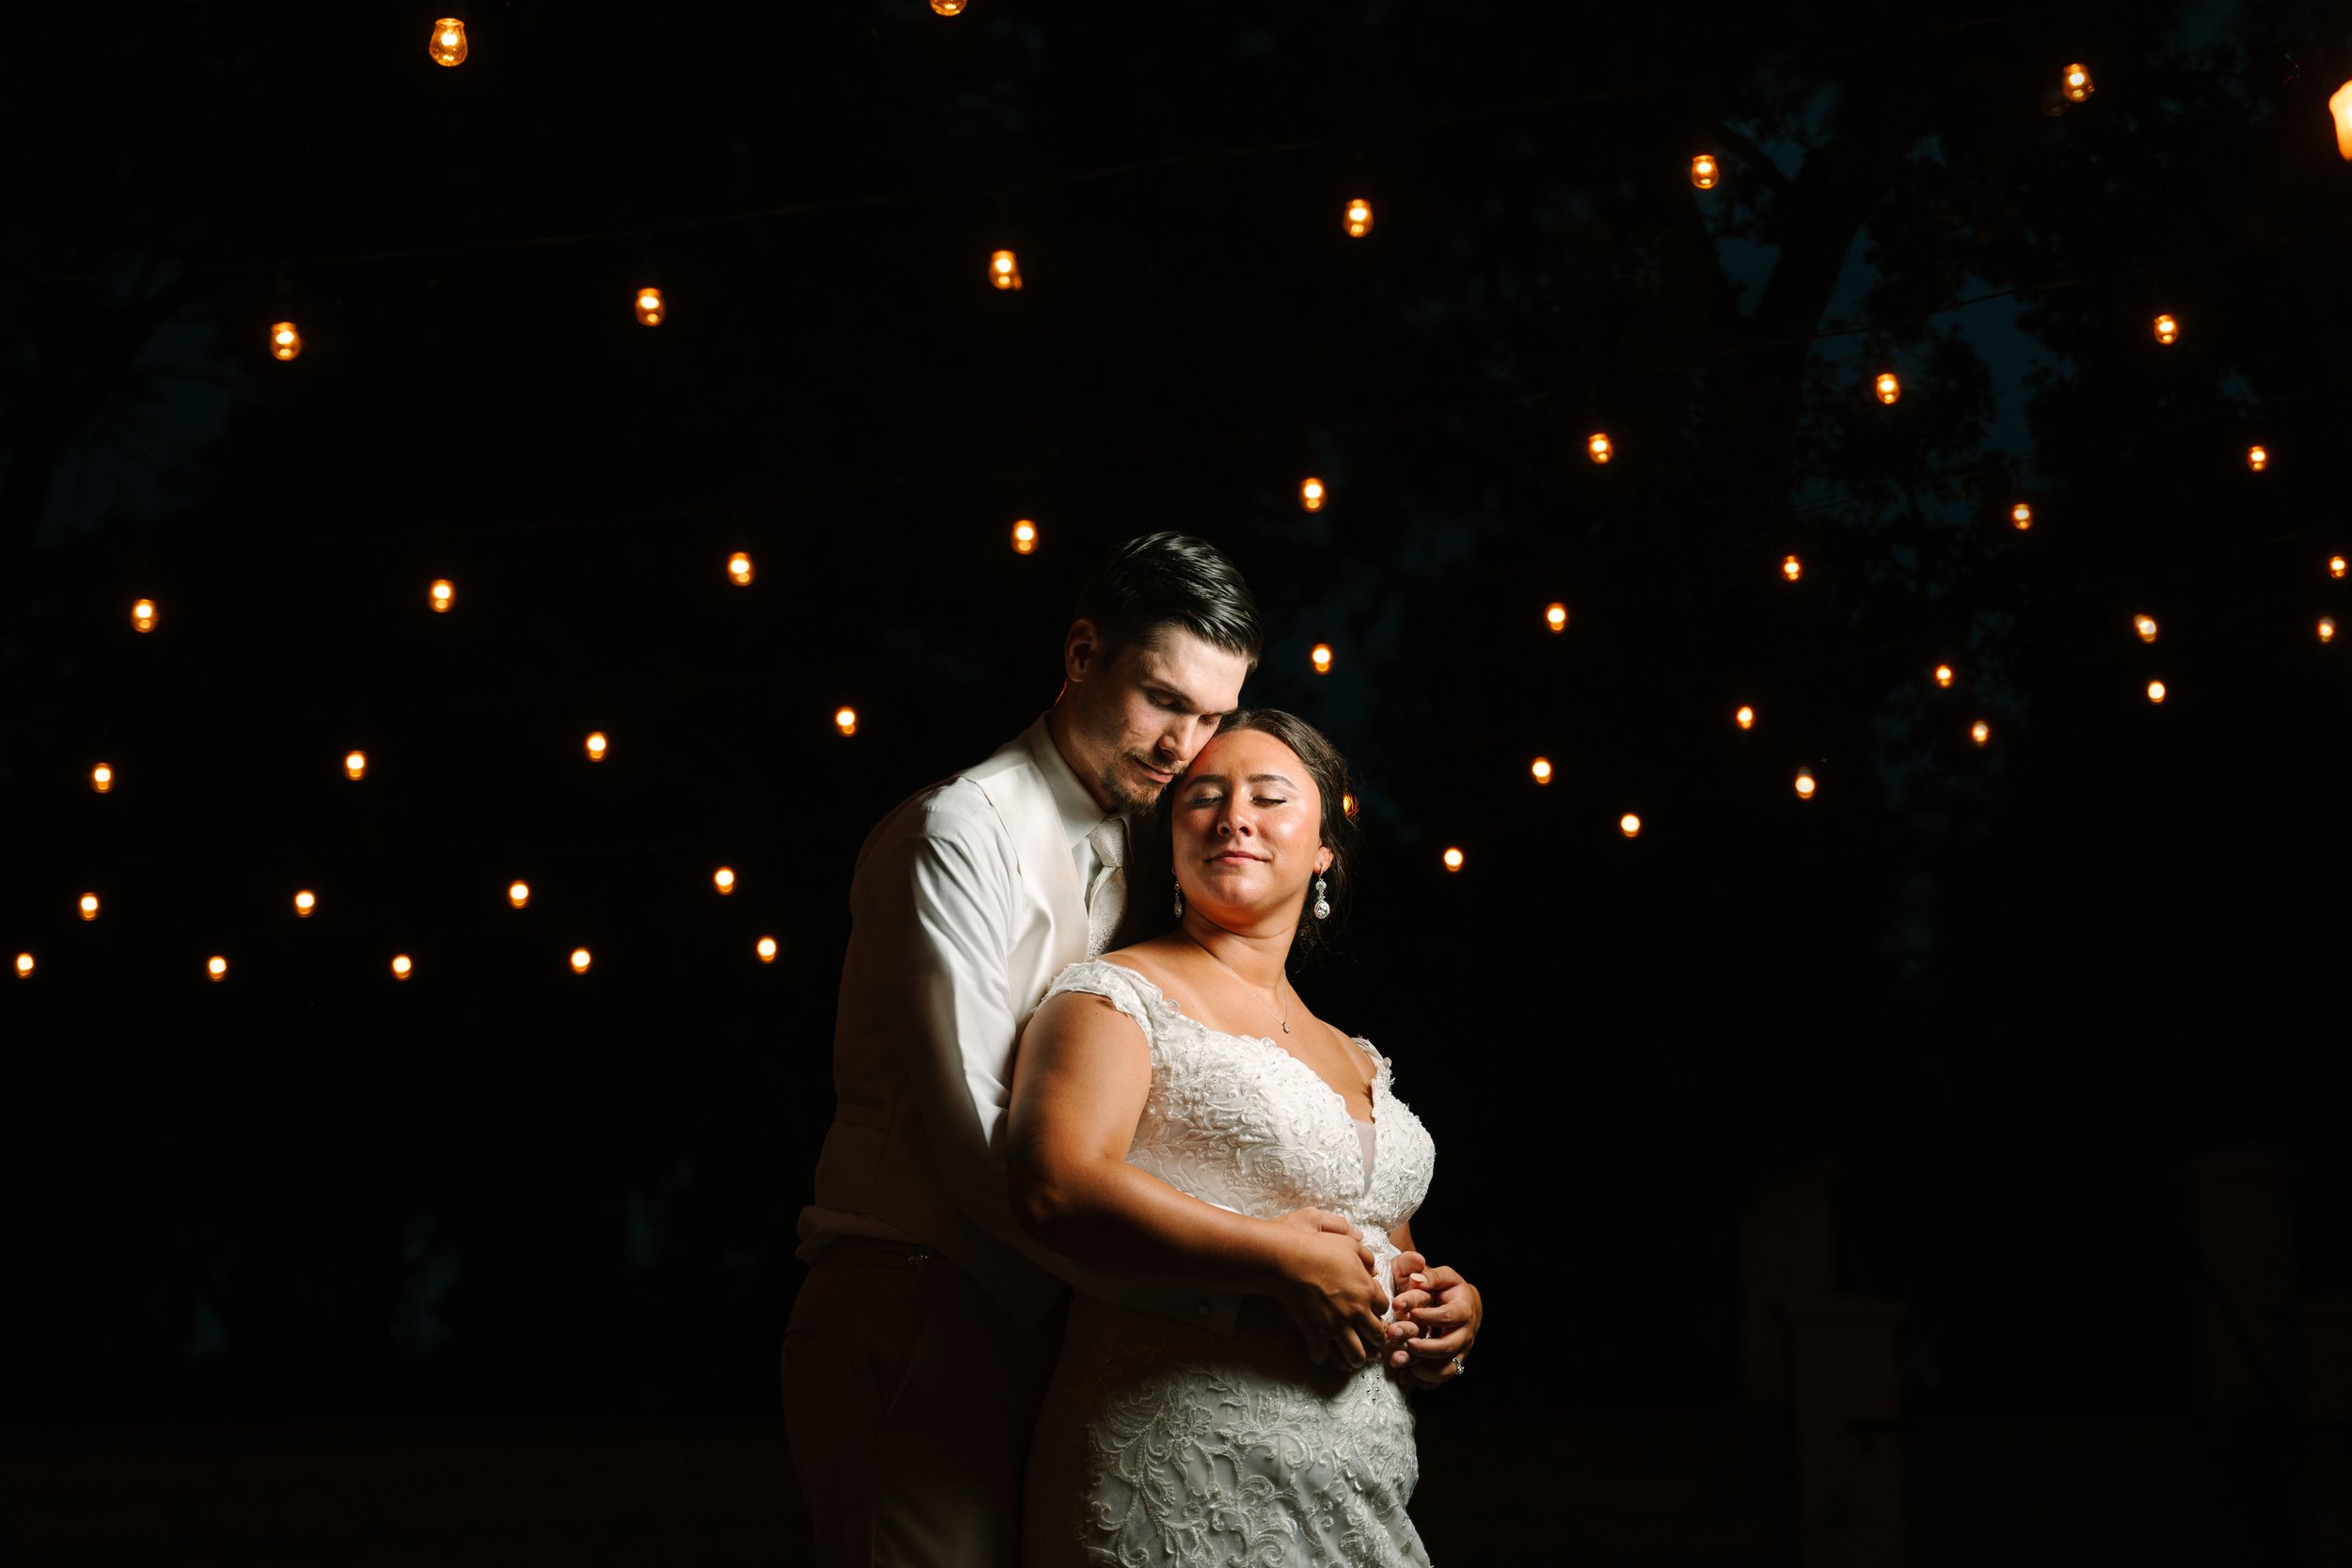 An intimate night shot of a stunning bride and groom in Burlington, Wisconsin